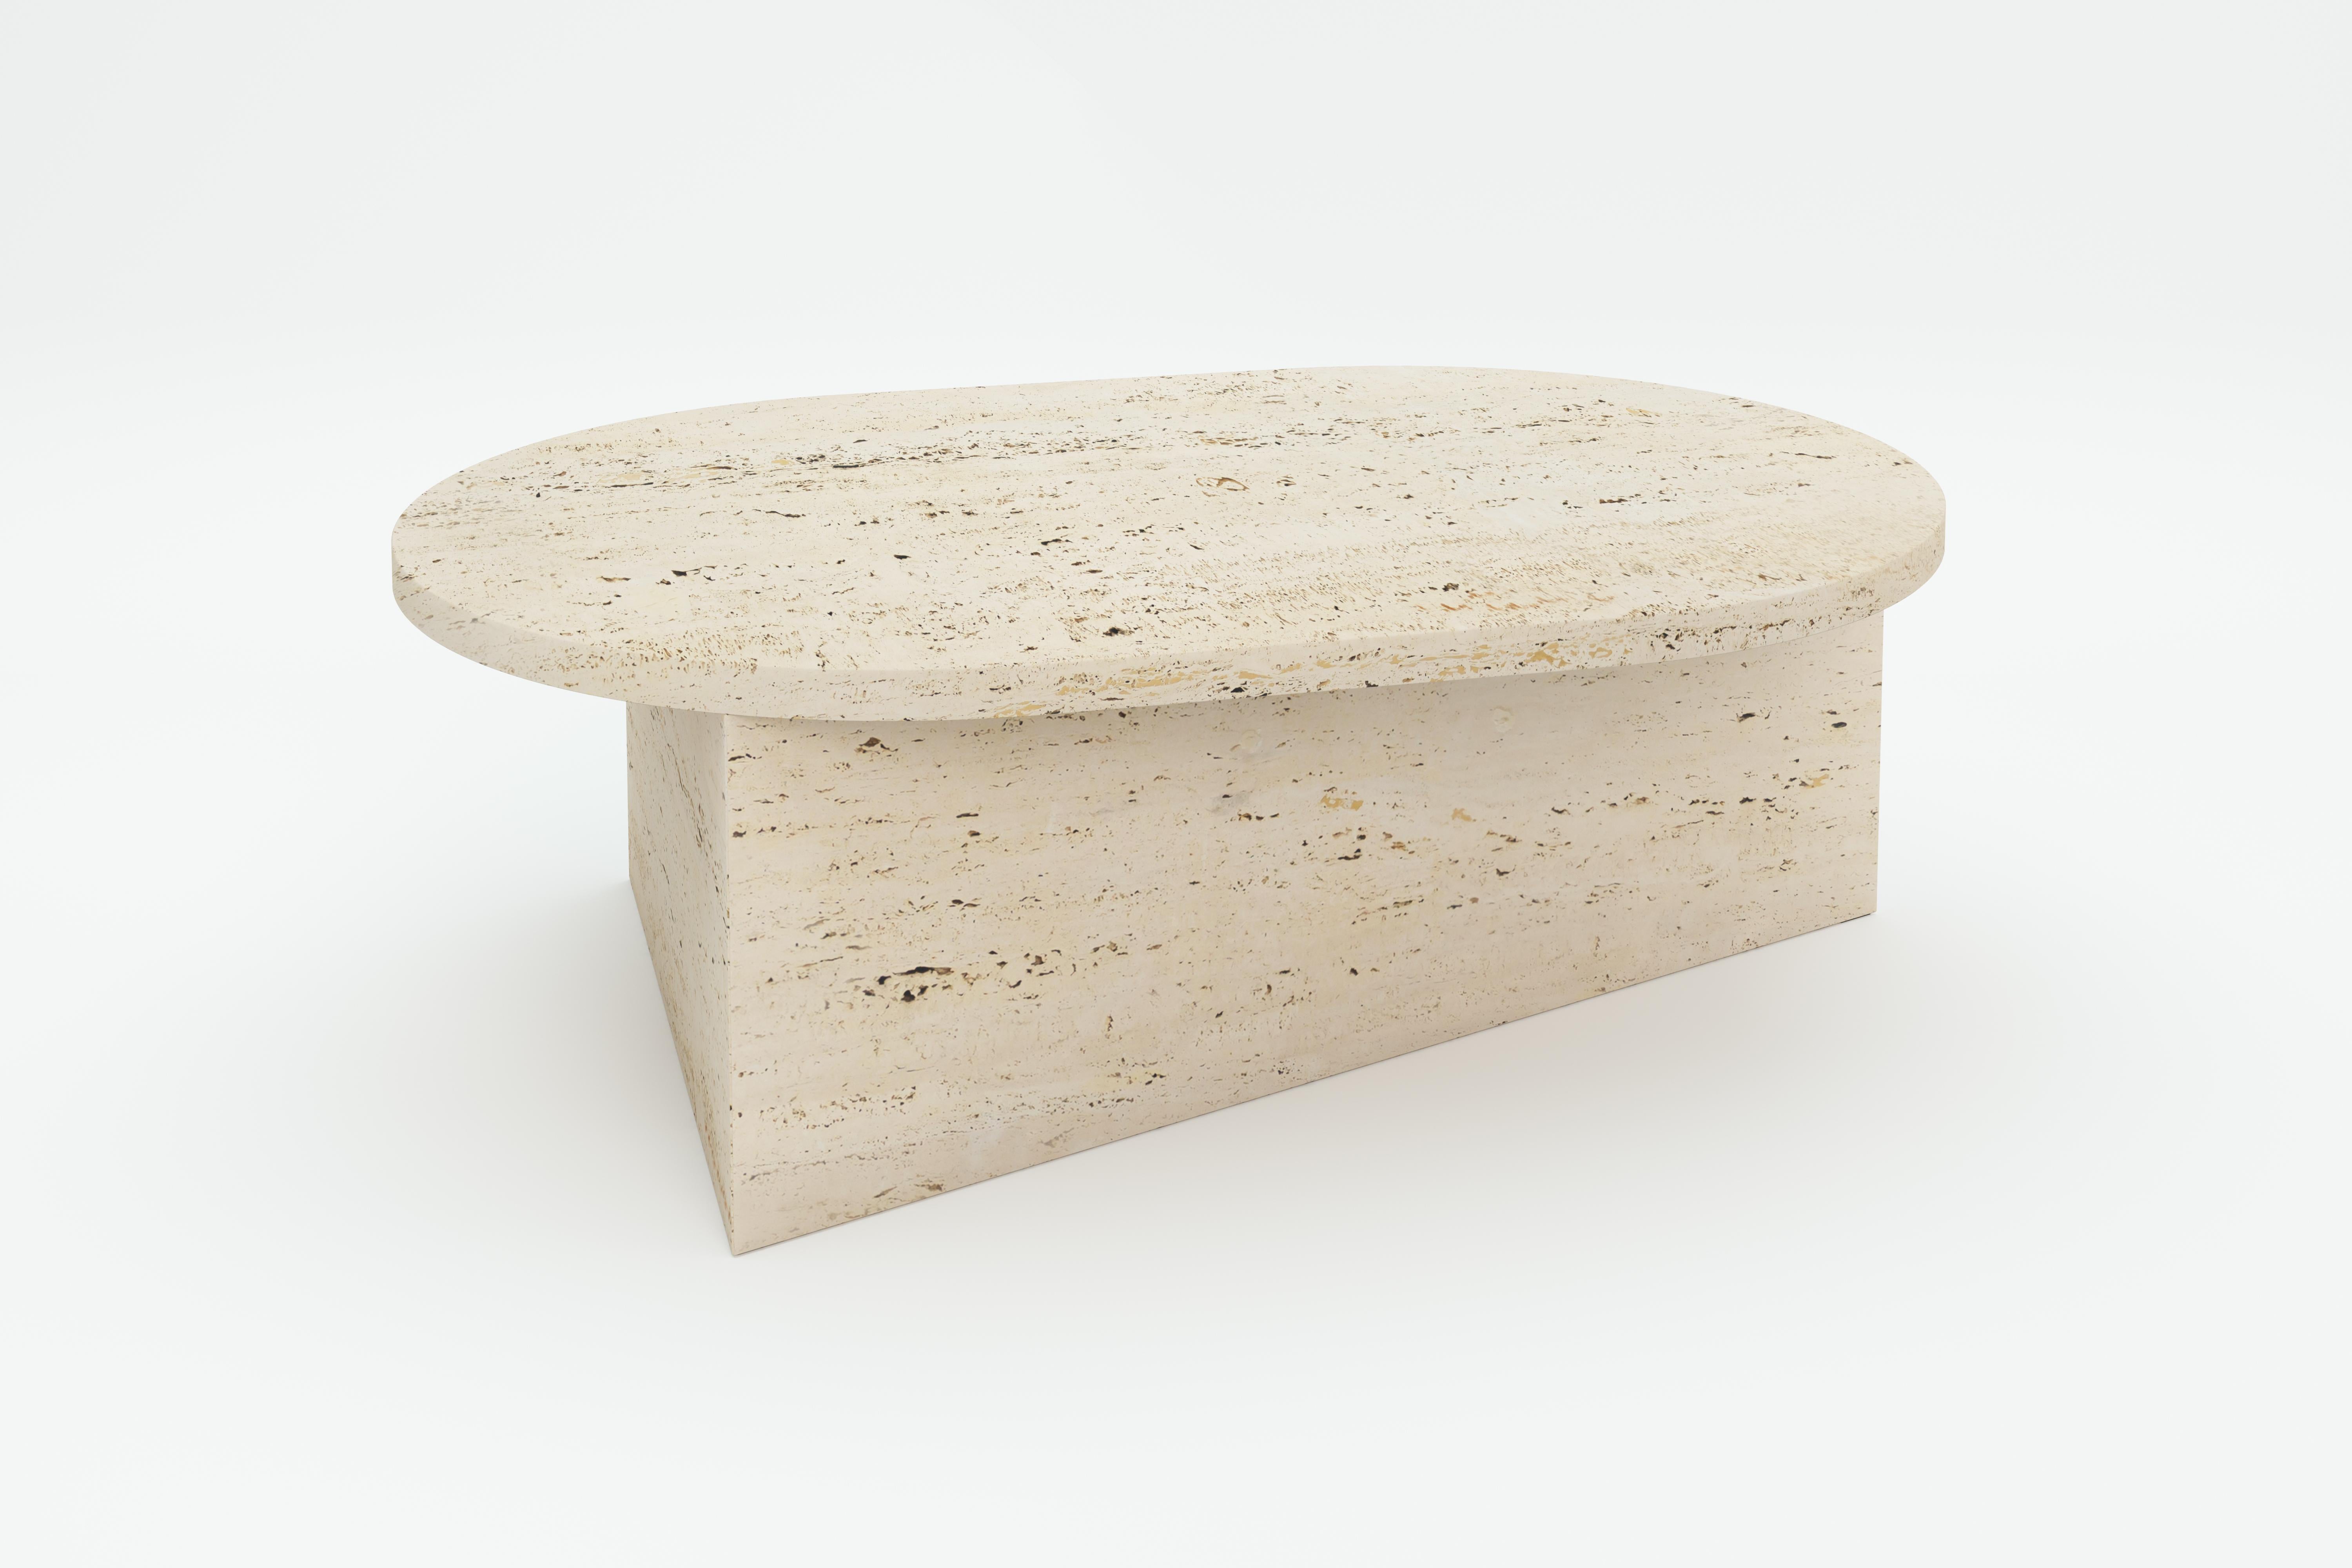 Travertine Oblong Prisma 105 coffe table by Sebastian Scherer
Dimensions: D105 x W70x H35 cm
Materials: Travertine.
Weight: 90.4 kg.
Also Available in: Glass, Mirror, Steel, different dimensions.

All joining edges precisely glued in mitre /